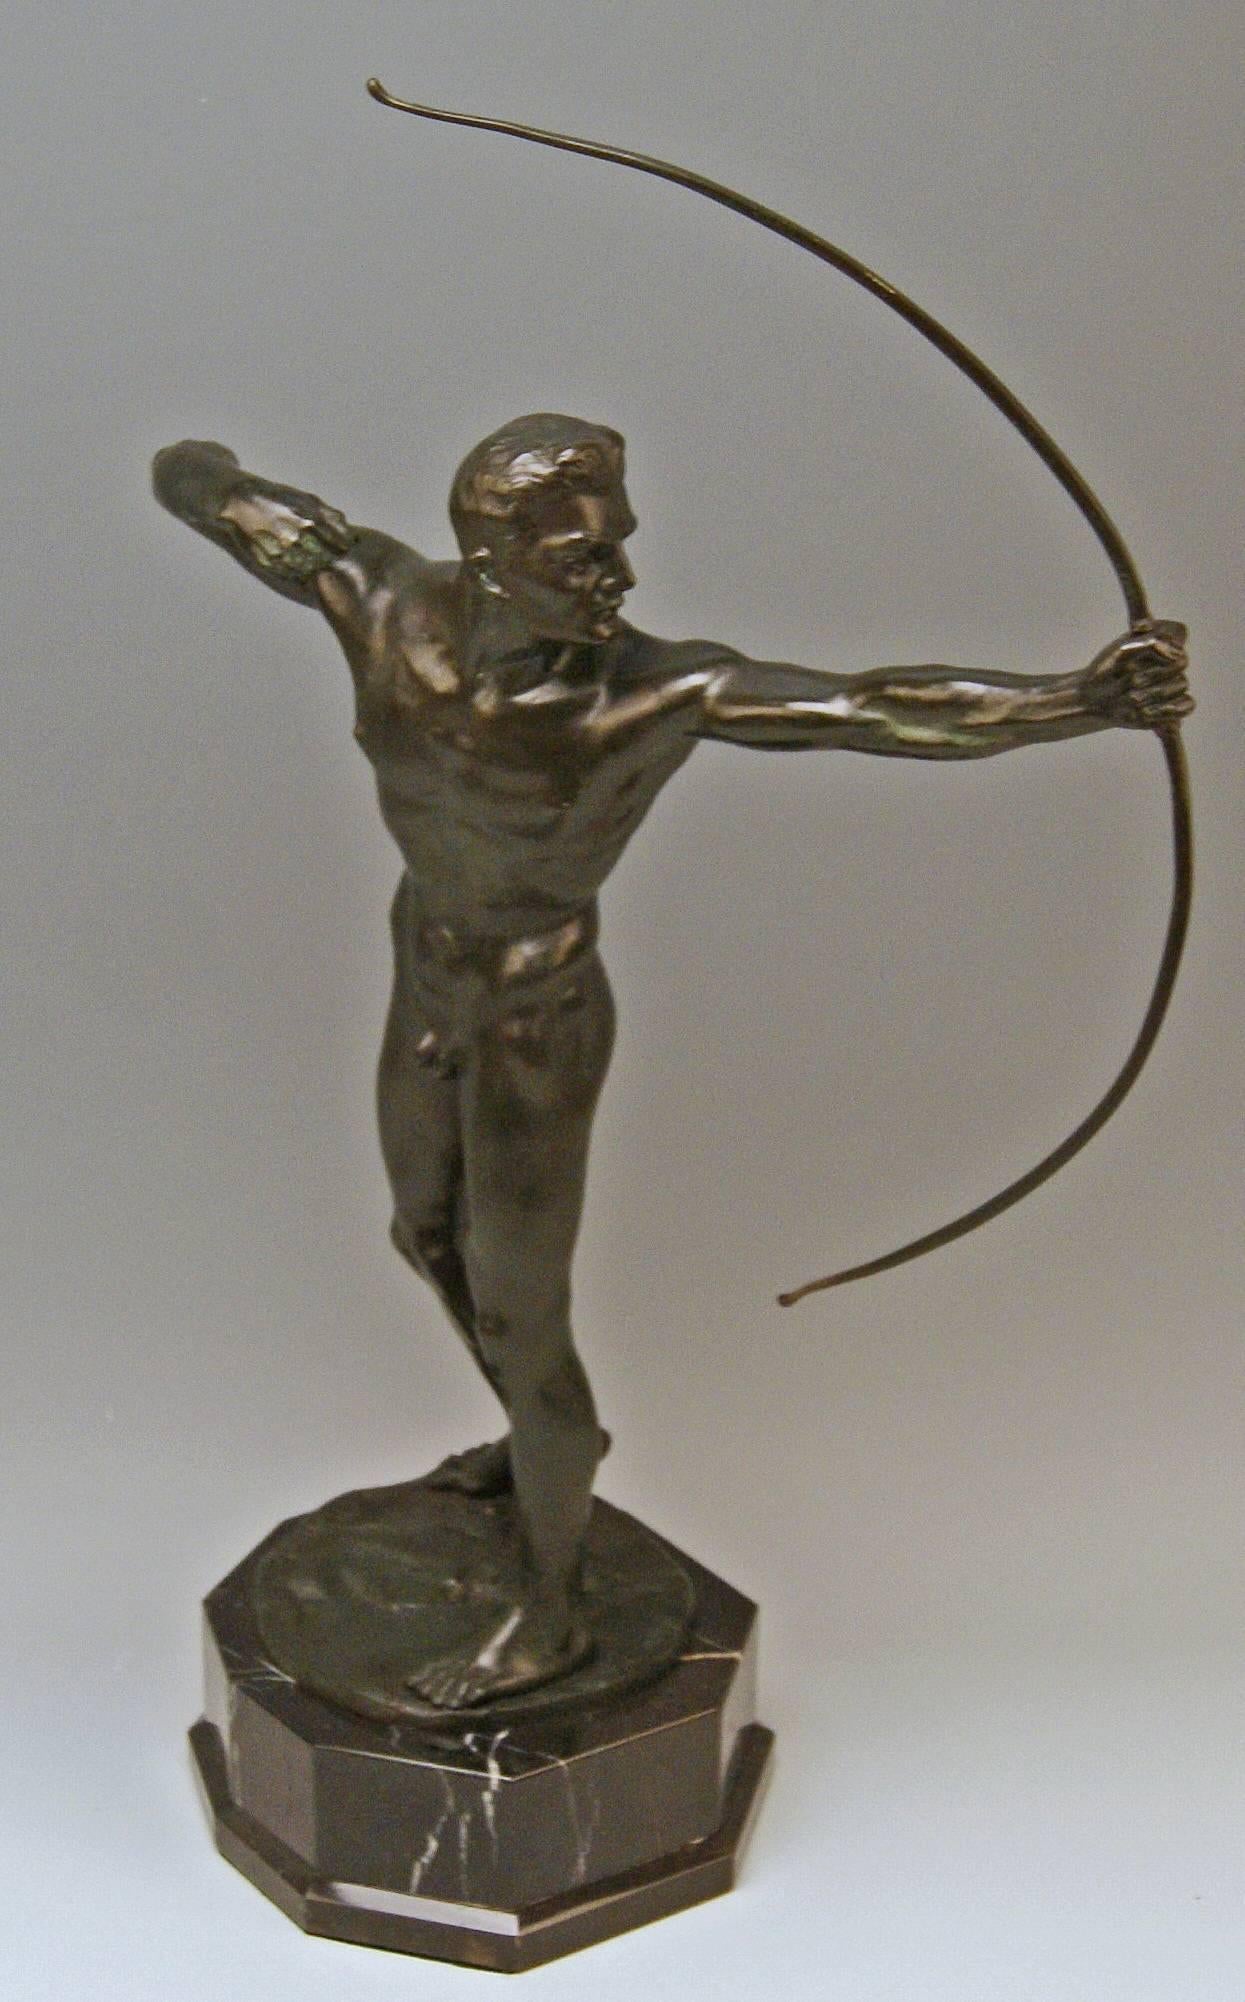 Exquisite antique tall bronze male nude figurine (= Archer / Bowman) made by German manufactory in middle of the 1920s.

Hallmarked:
Prof. Poertzel (signature well visible at round bronze base): It is the German Sculptor Hermann Hugo Otto